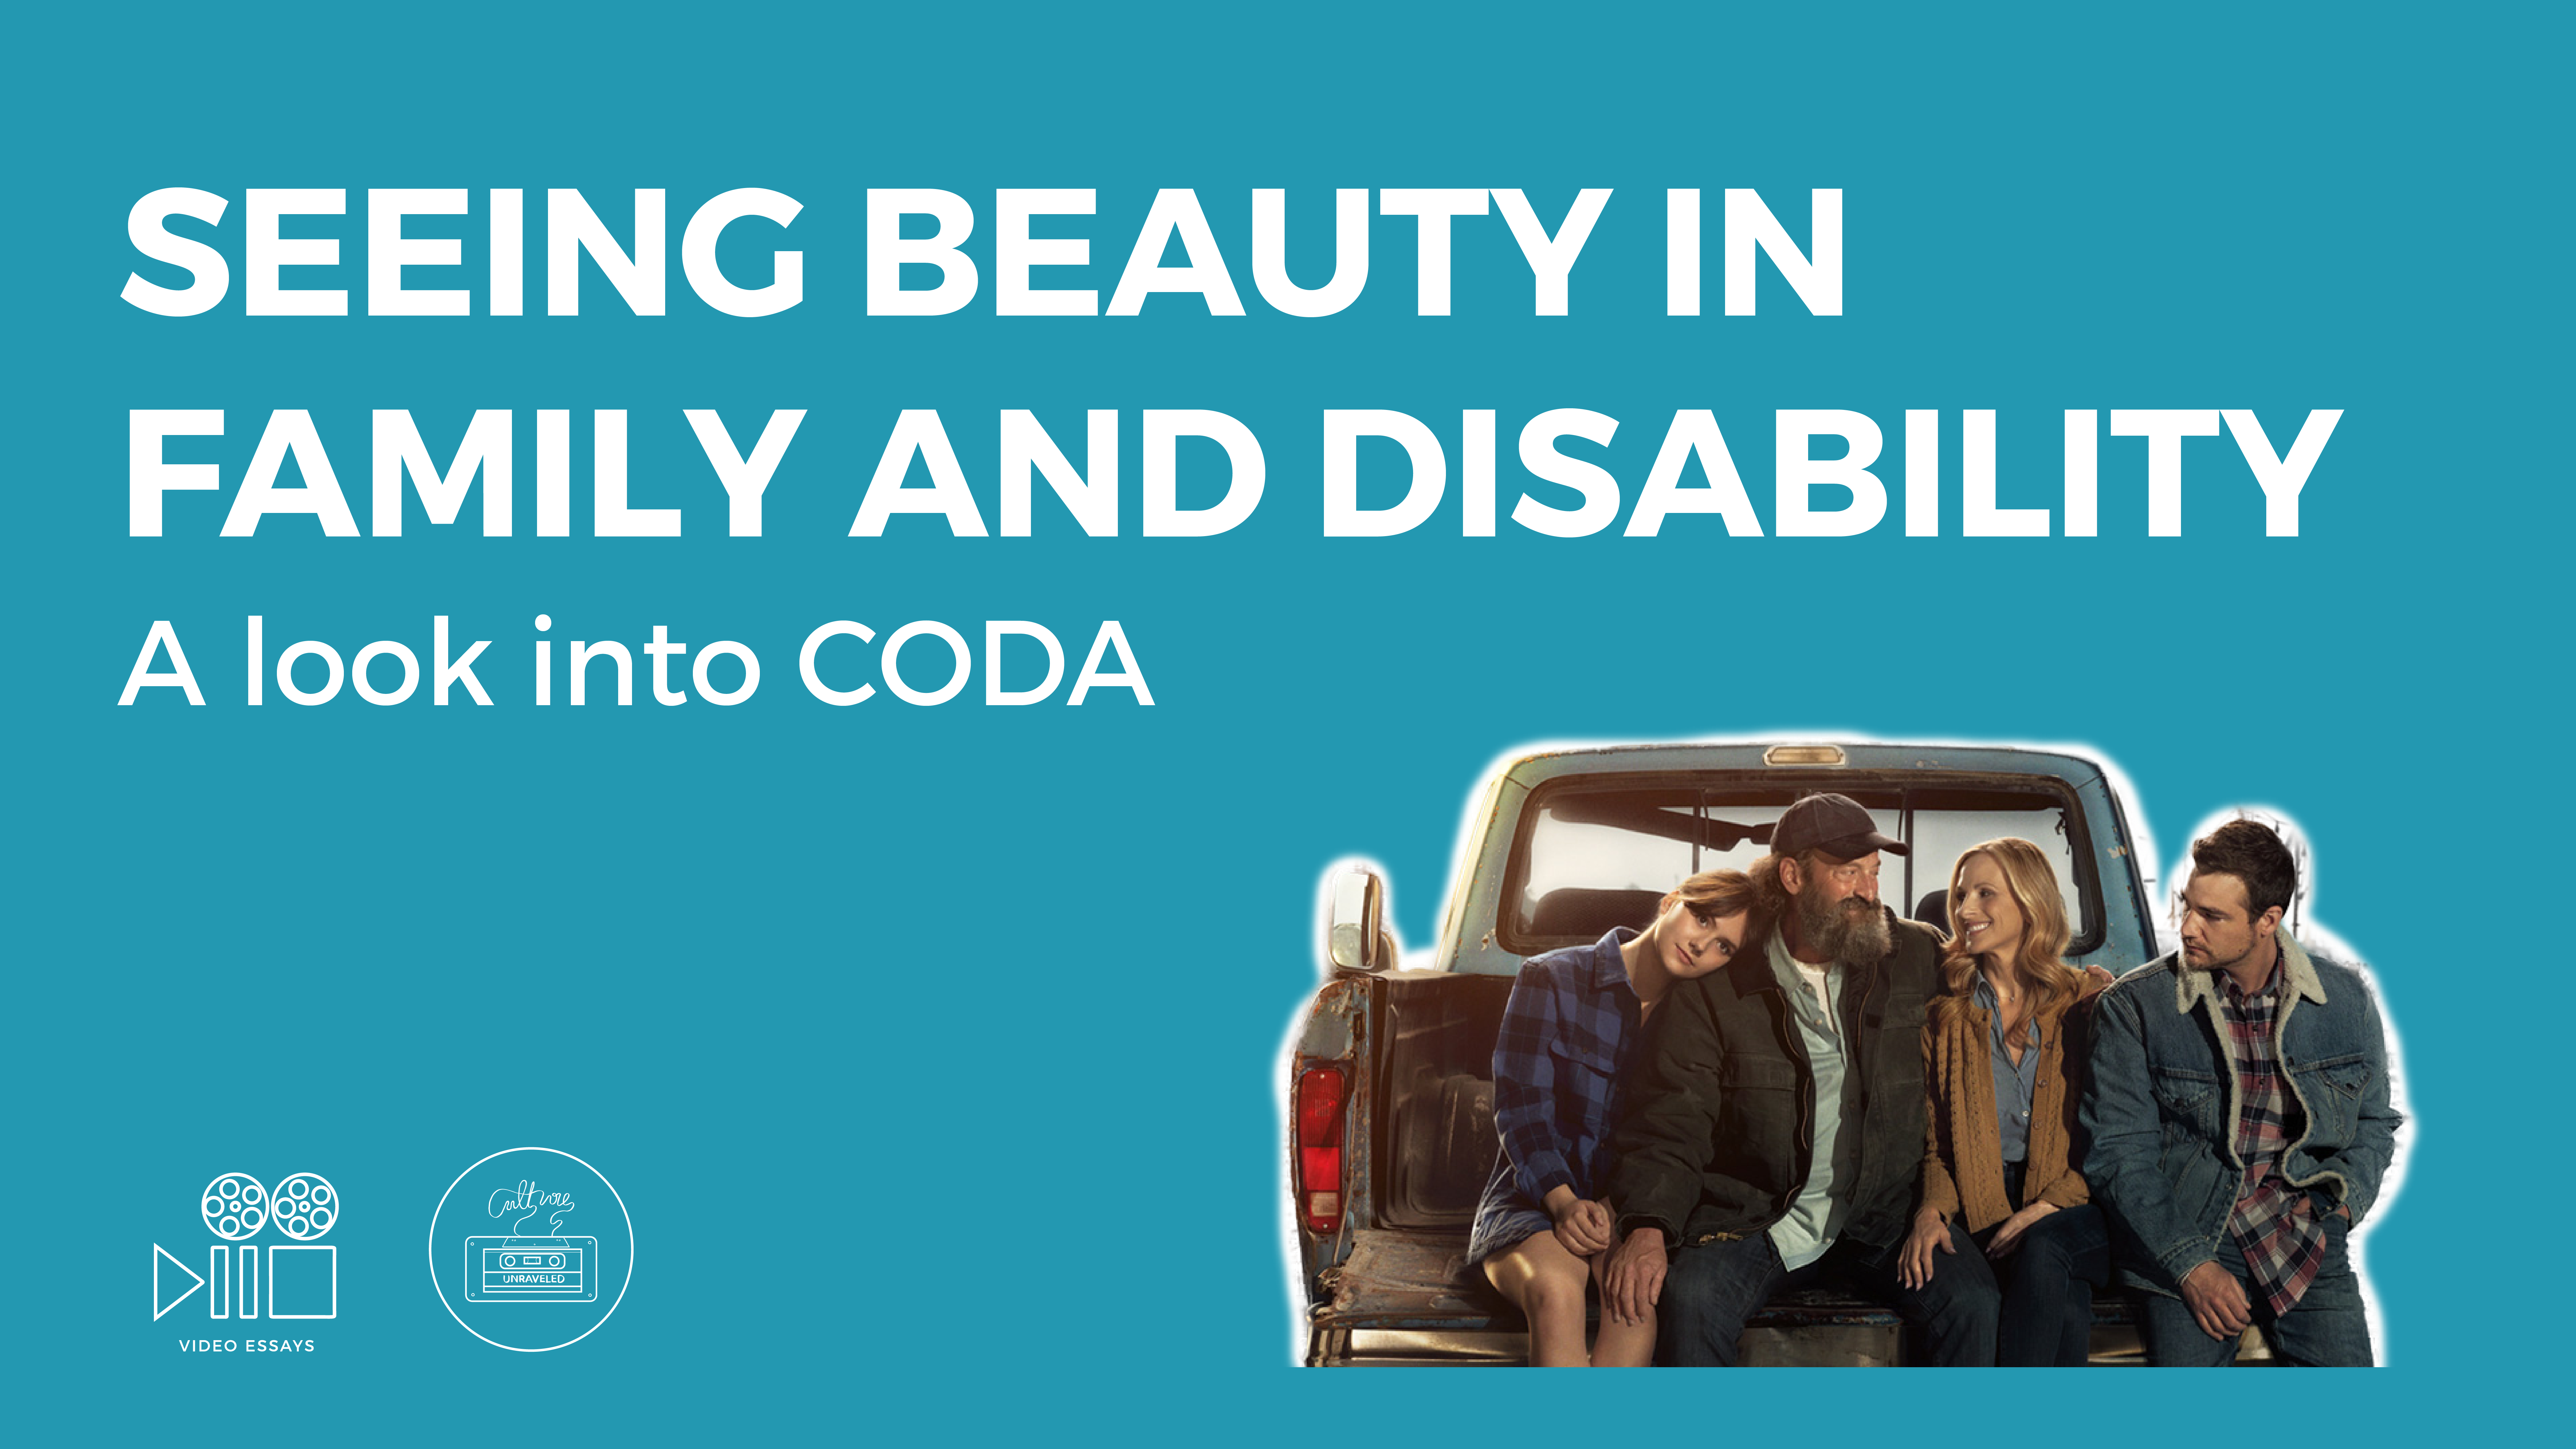 Seeing Beauty in Disability and Family. A Look into CODA